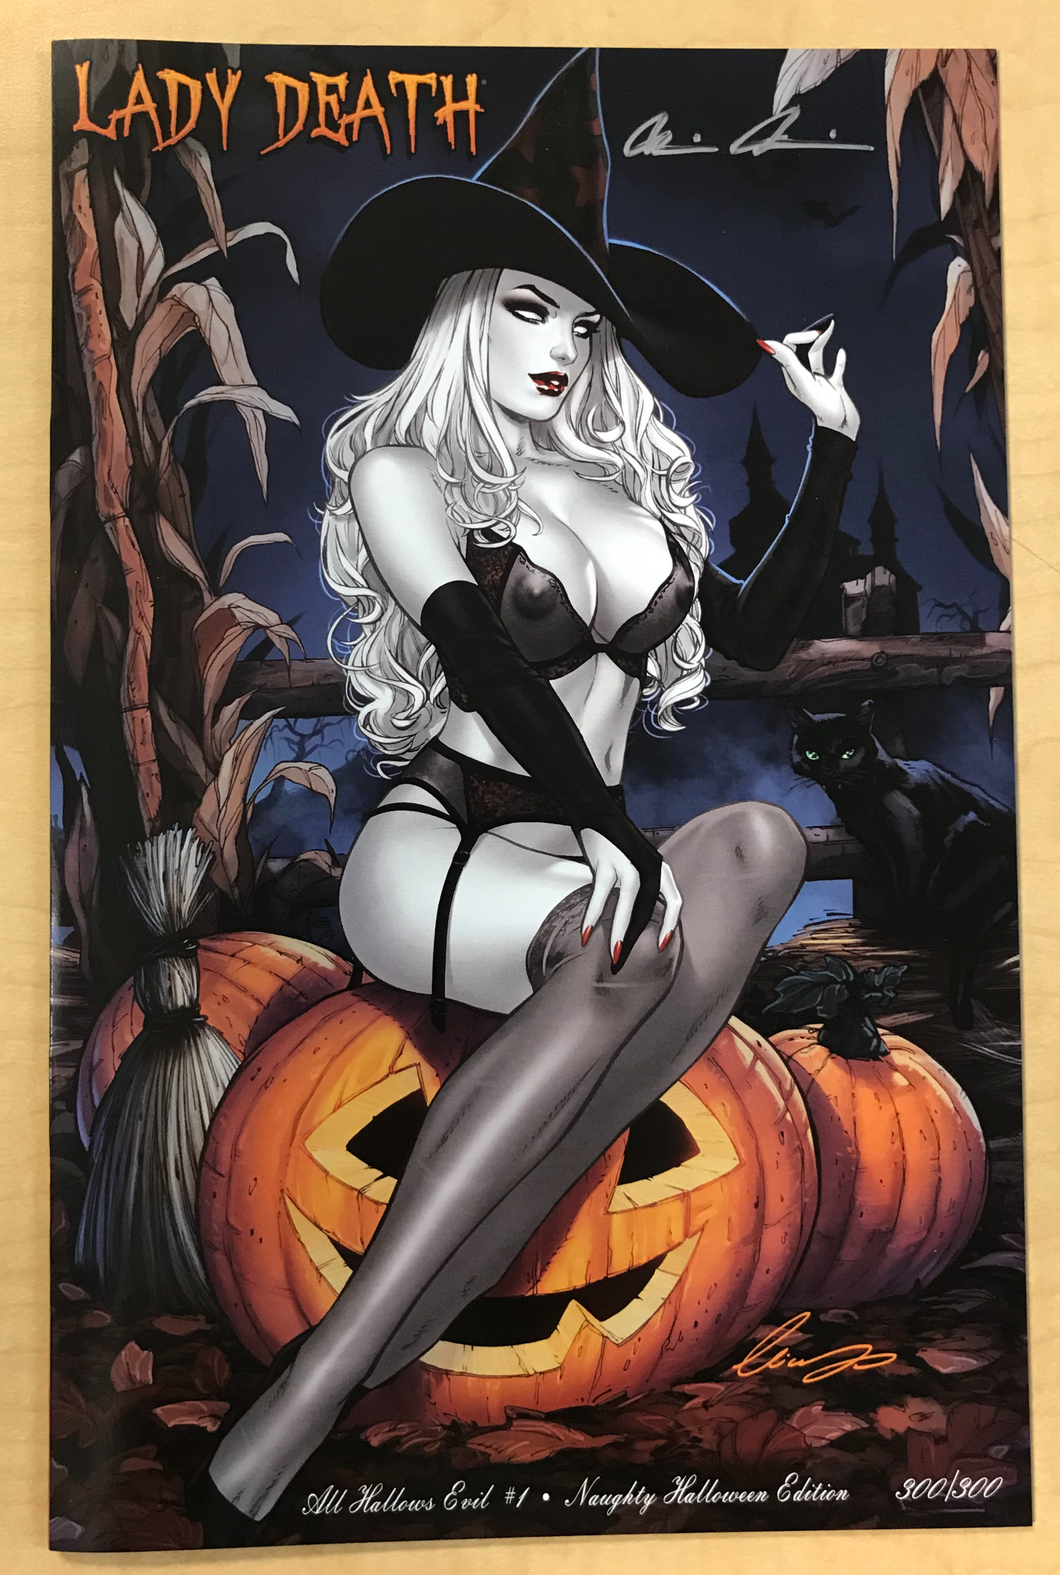 Lady Death: All Hallows Evil #1 2018 Naughty Halloween Edition Variant Cover by Elias Chatzoudis Signed by Brian Pulido w/ COA Limited to 300 Copies!!!